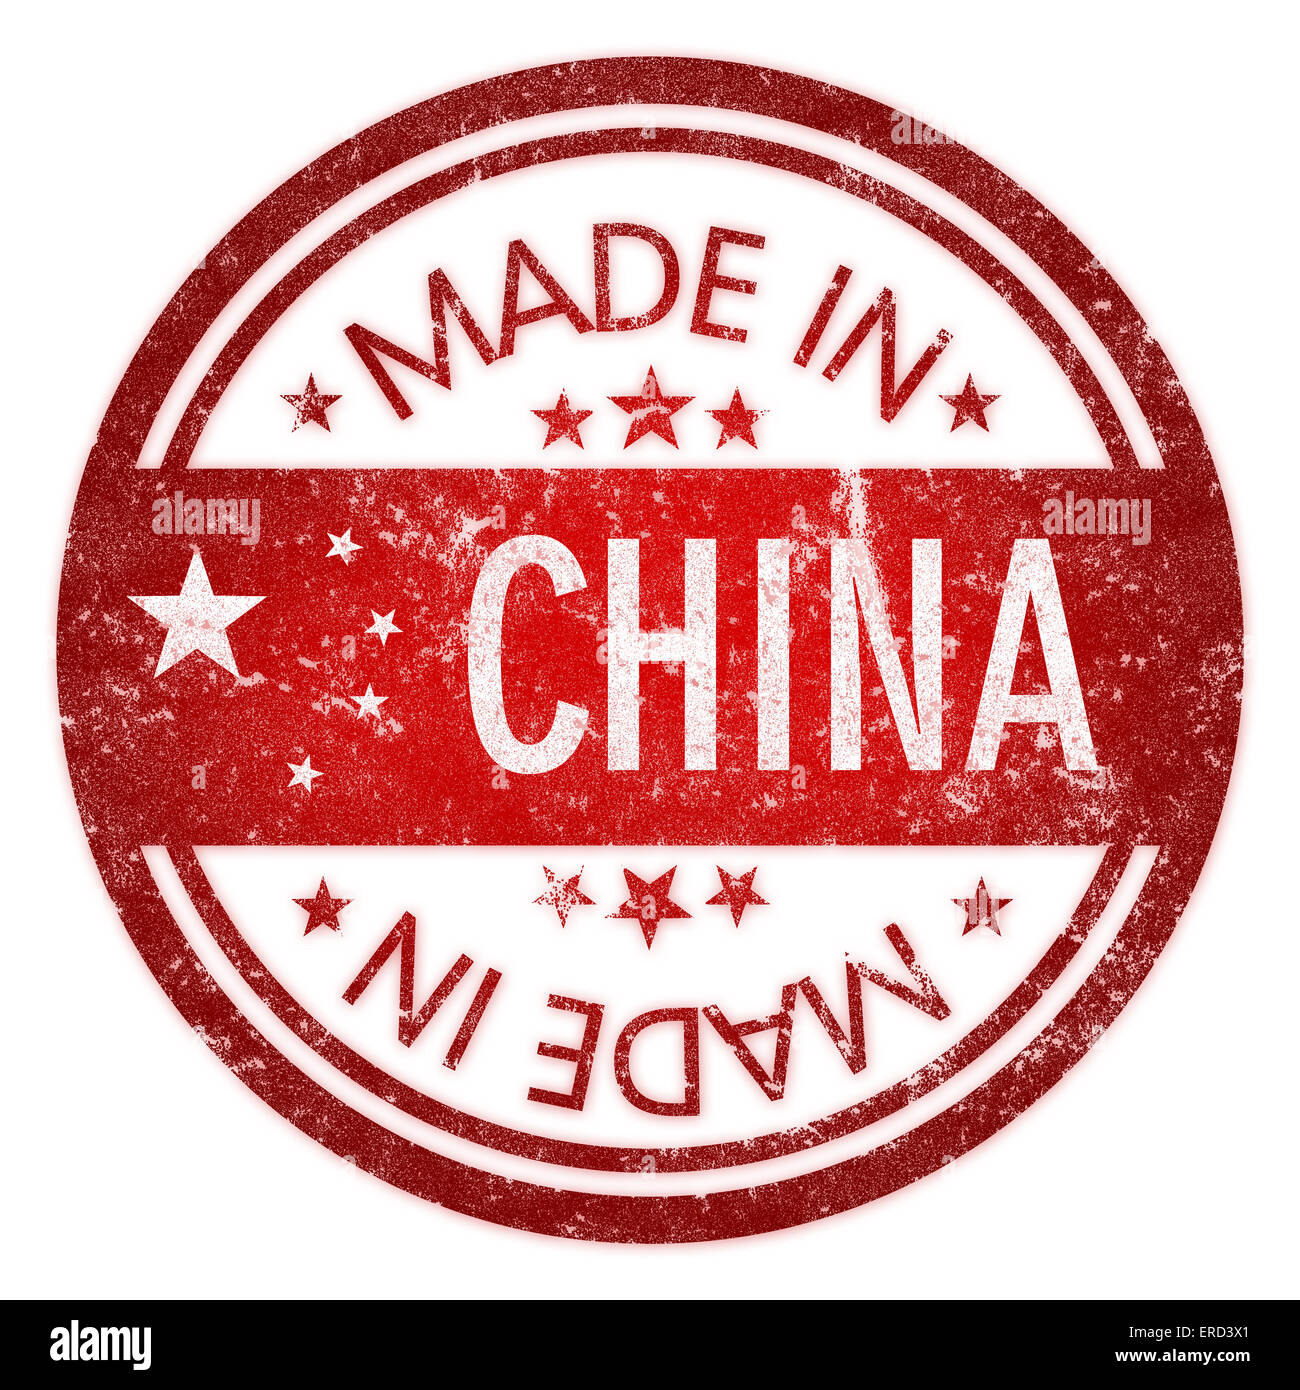 Made in China stamp isolated on white. Stock Photo